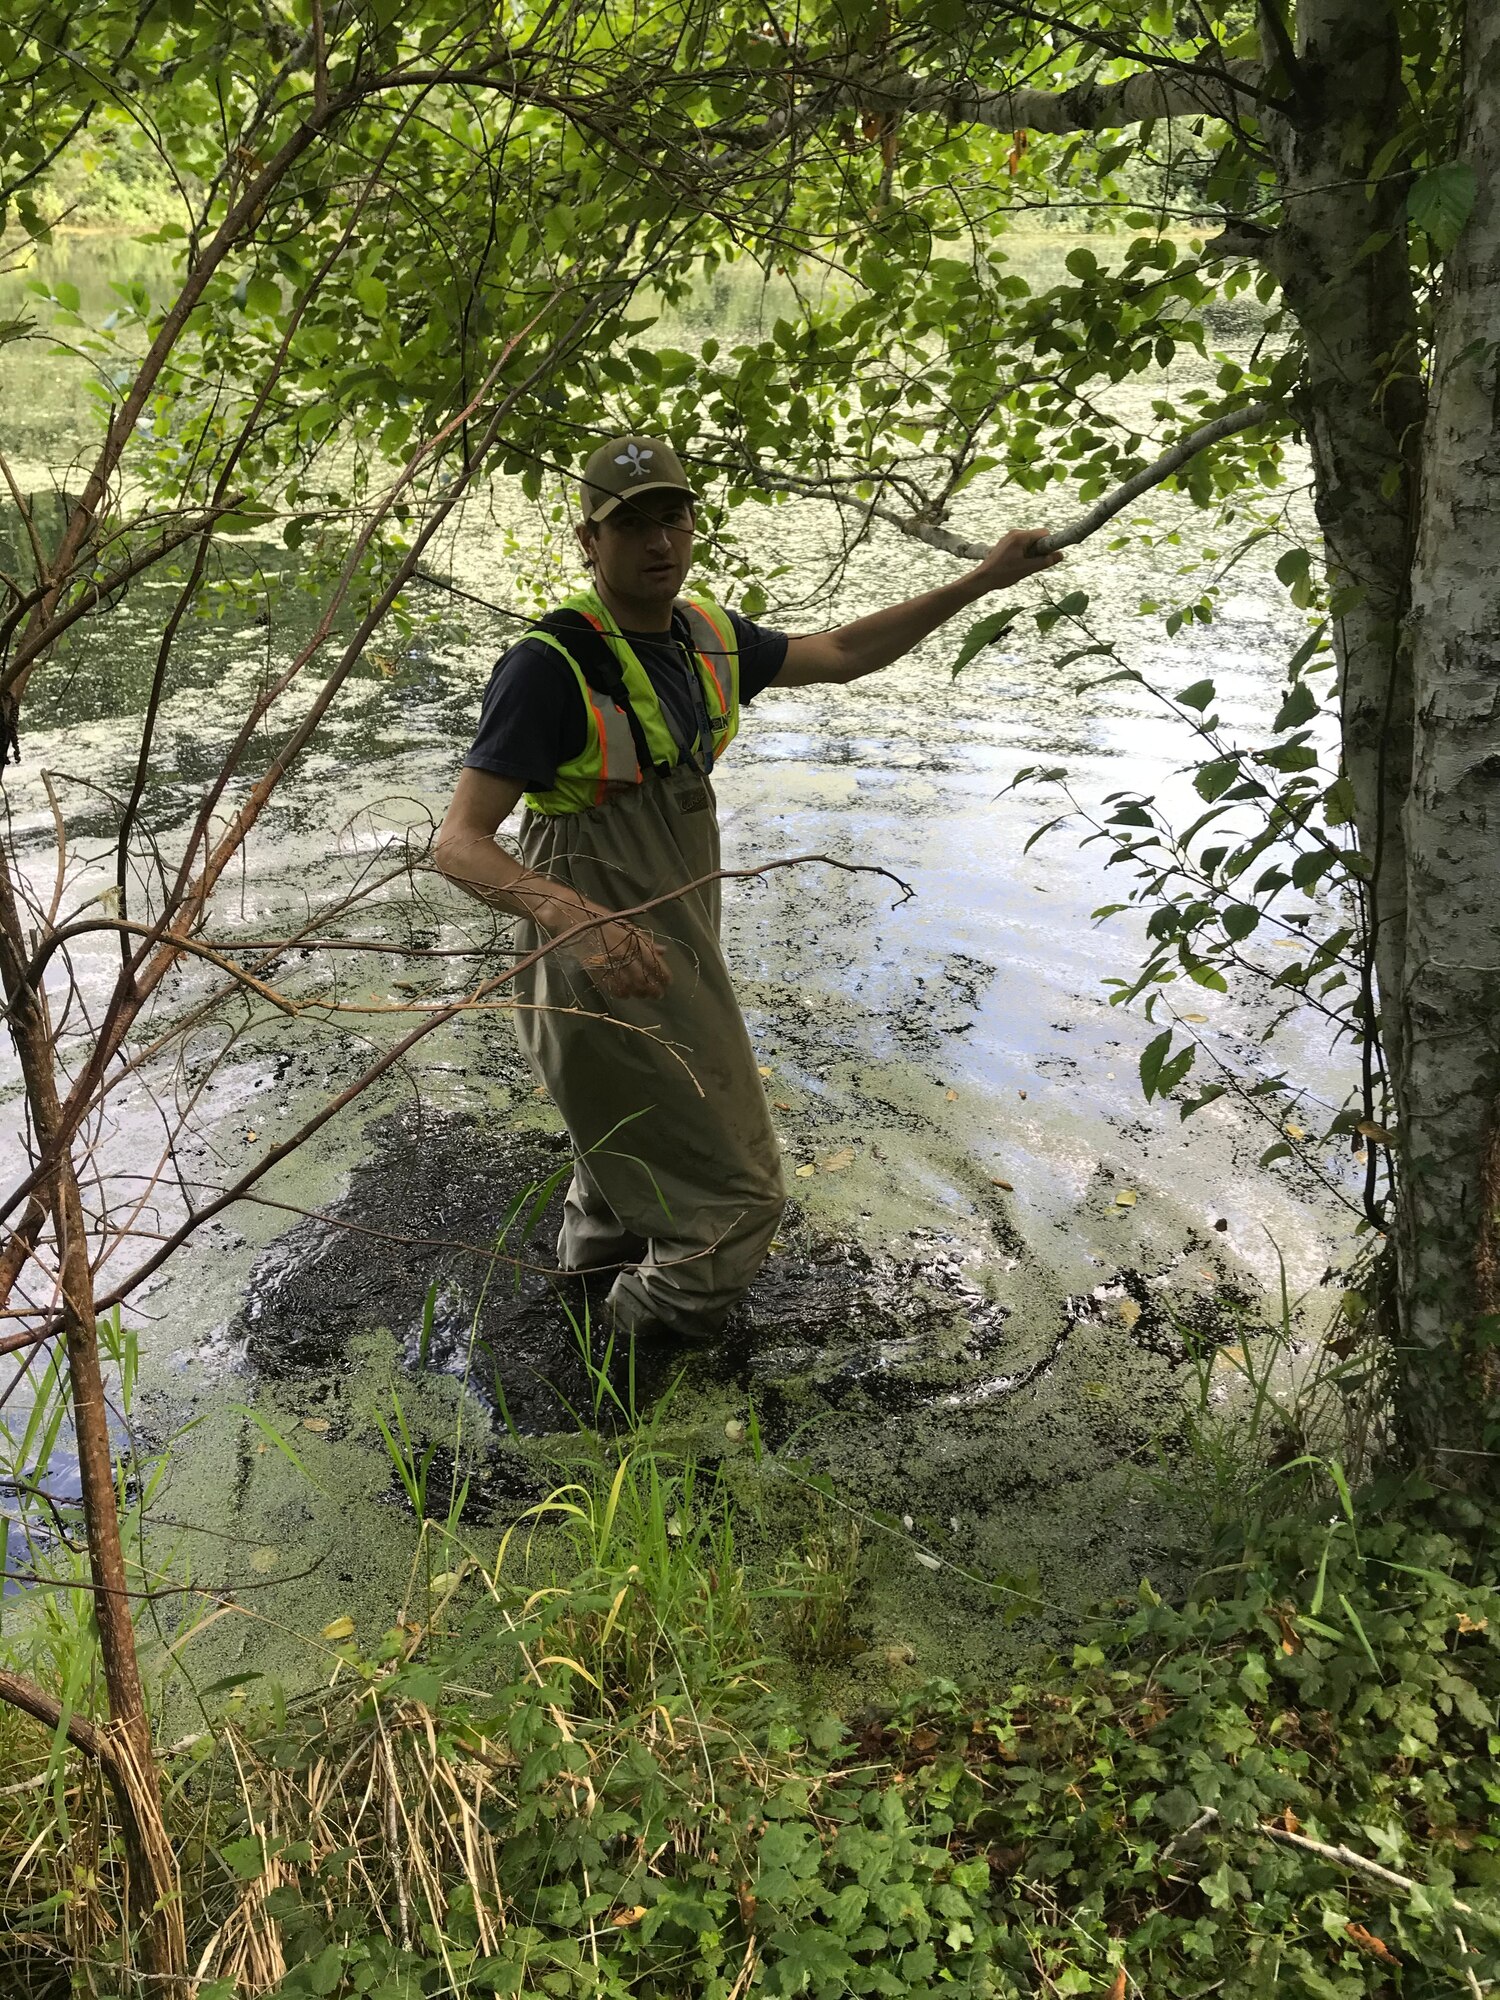 Man in waders standing in pond.